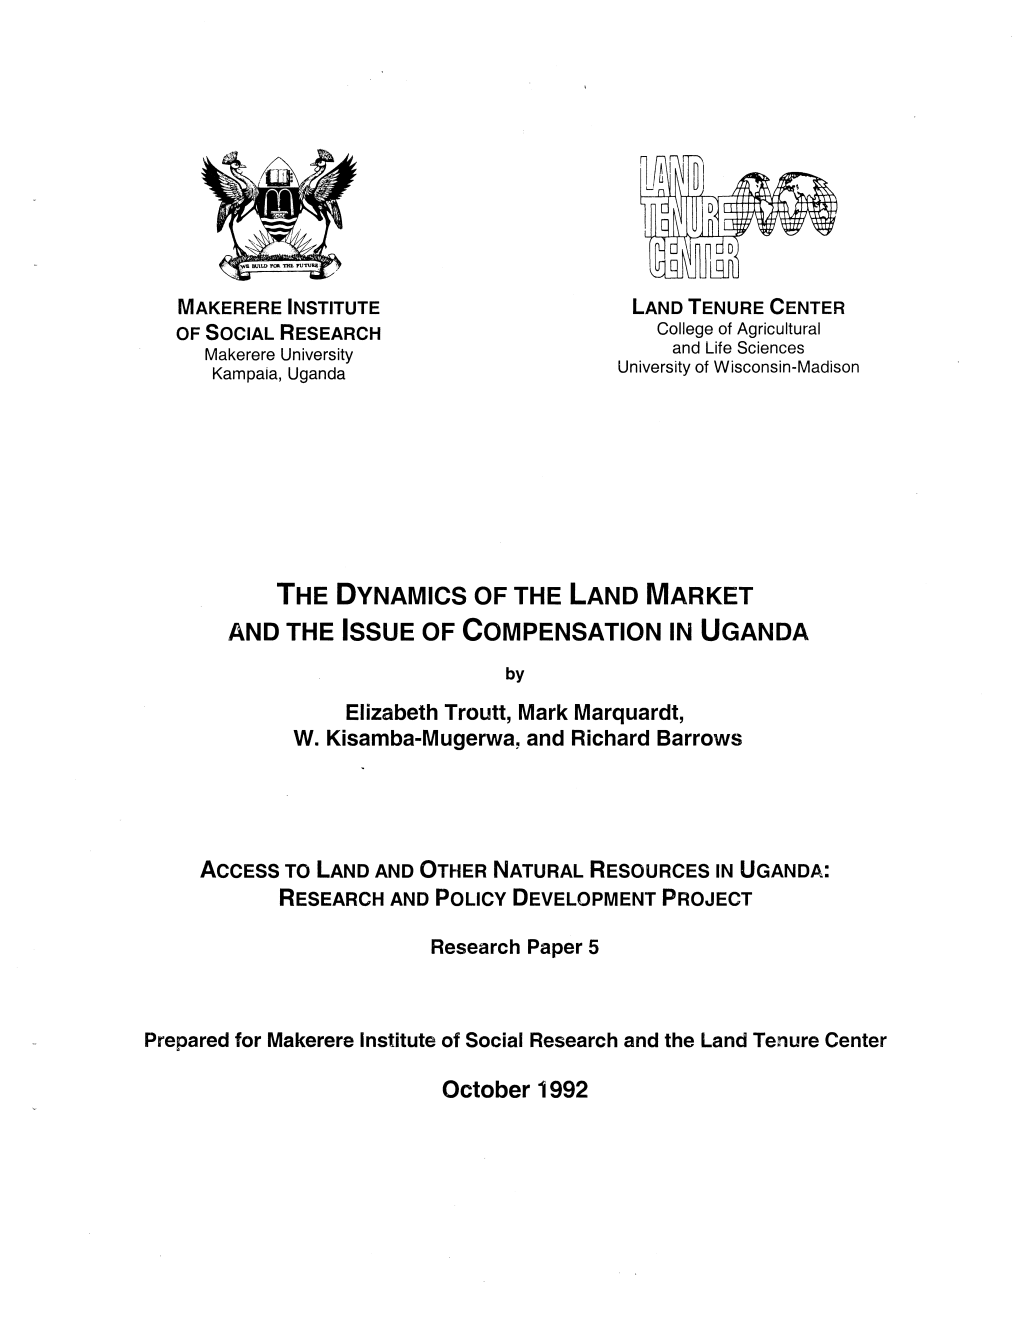 The Dynamics of the Land Market and the Issue of Compensation in Uganda